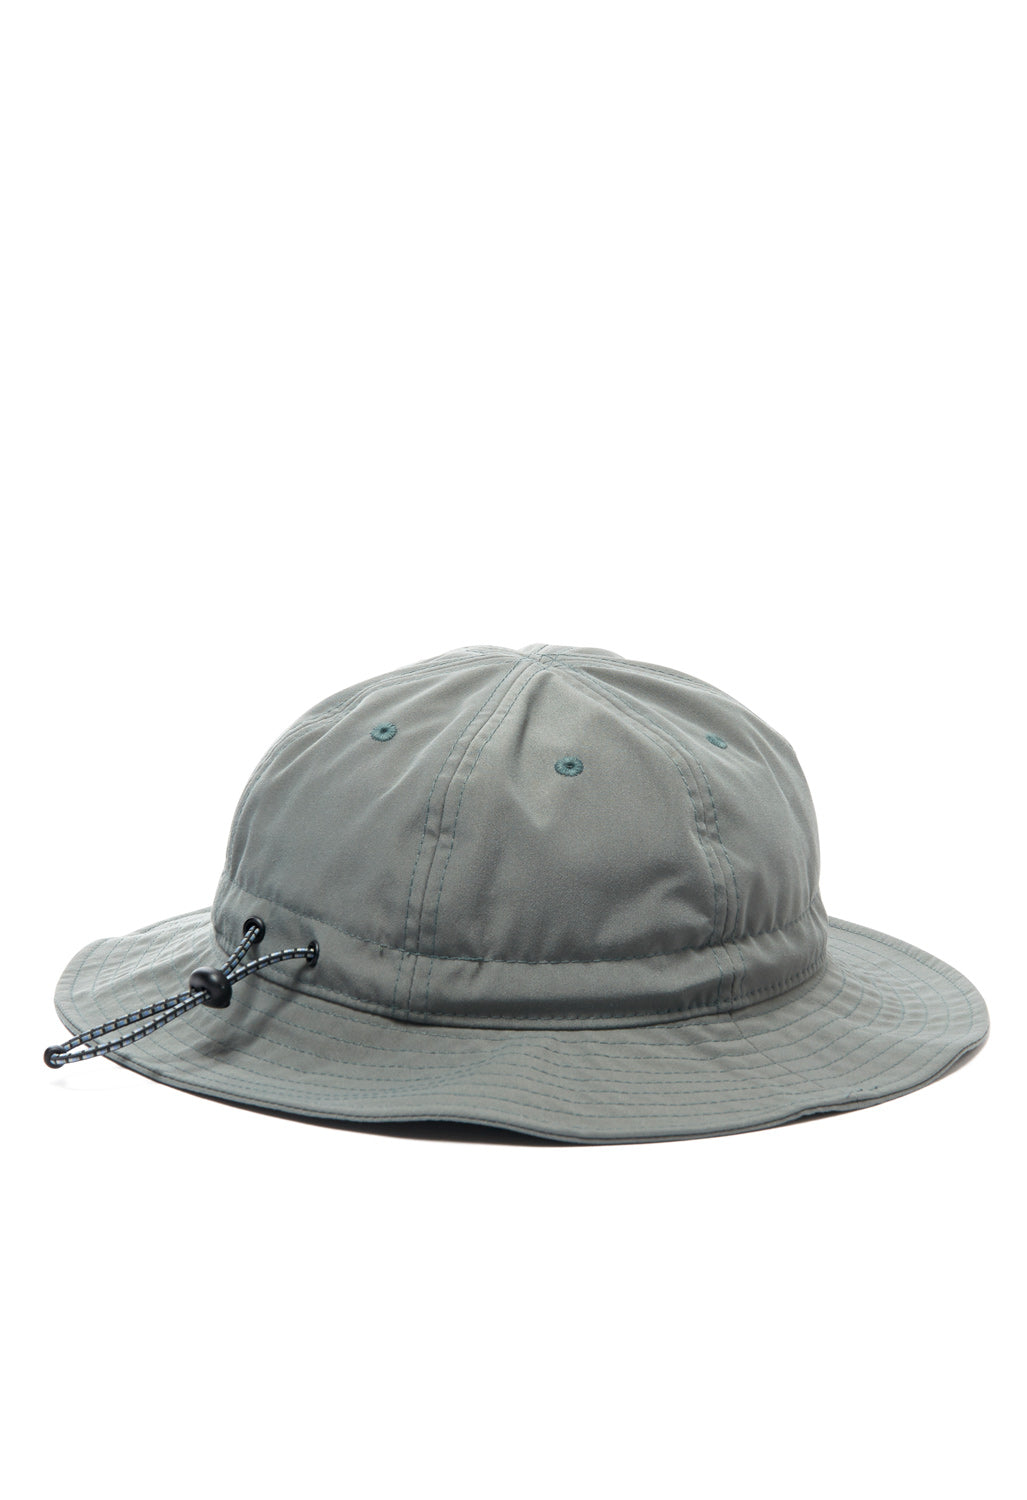 Carhartt WIP Perth Bucket Hat - Thyme – Outsiders Store UK